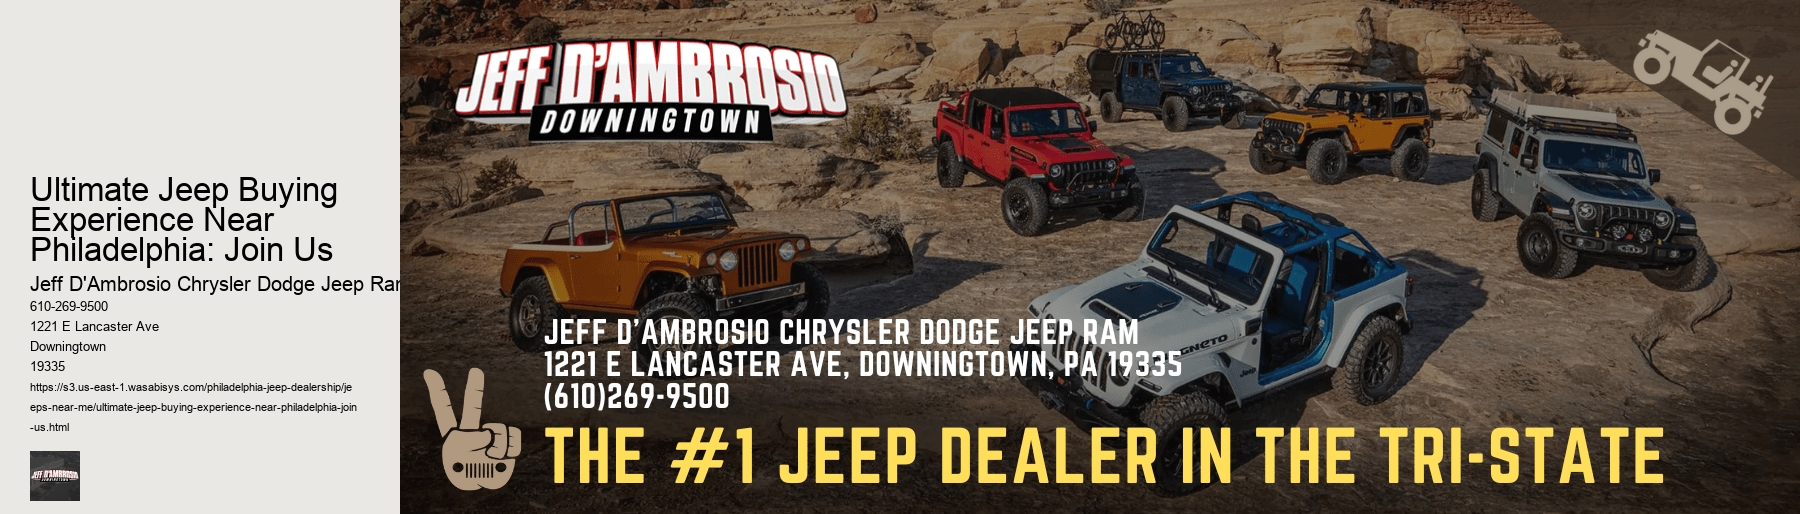 Ultimate Jeep Buying Experience Near Philadelphia: Join Us